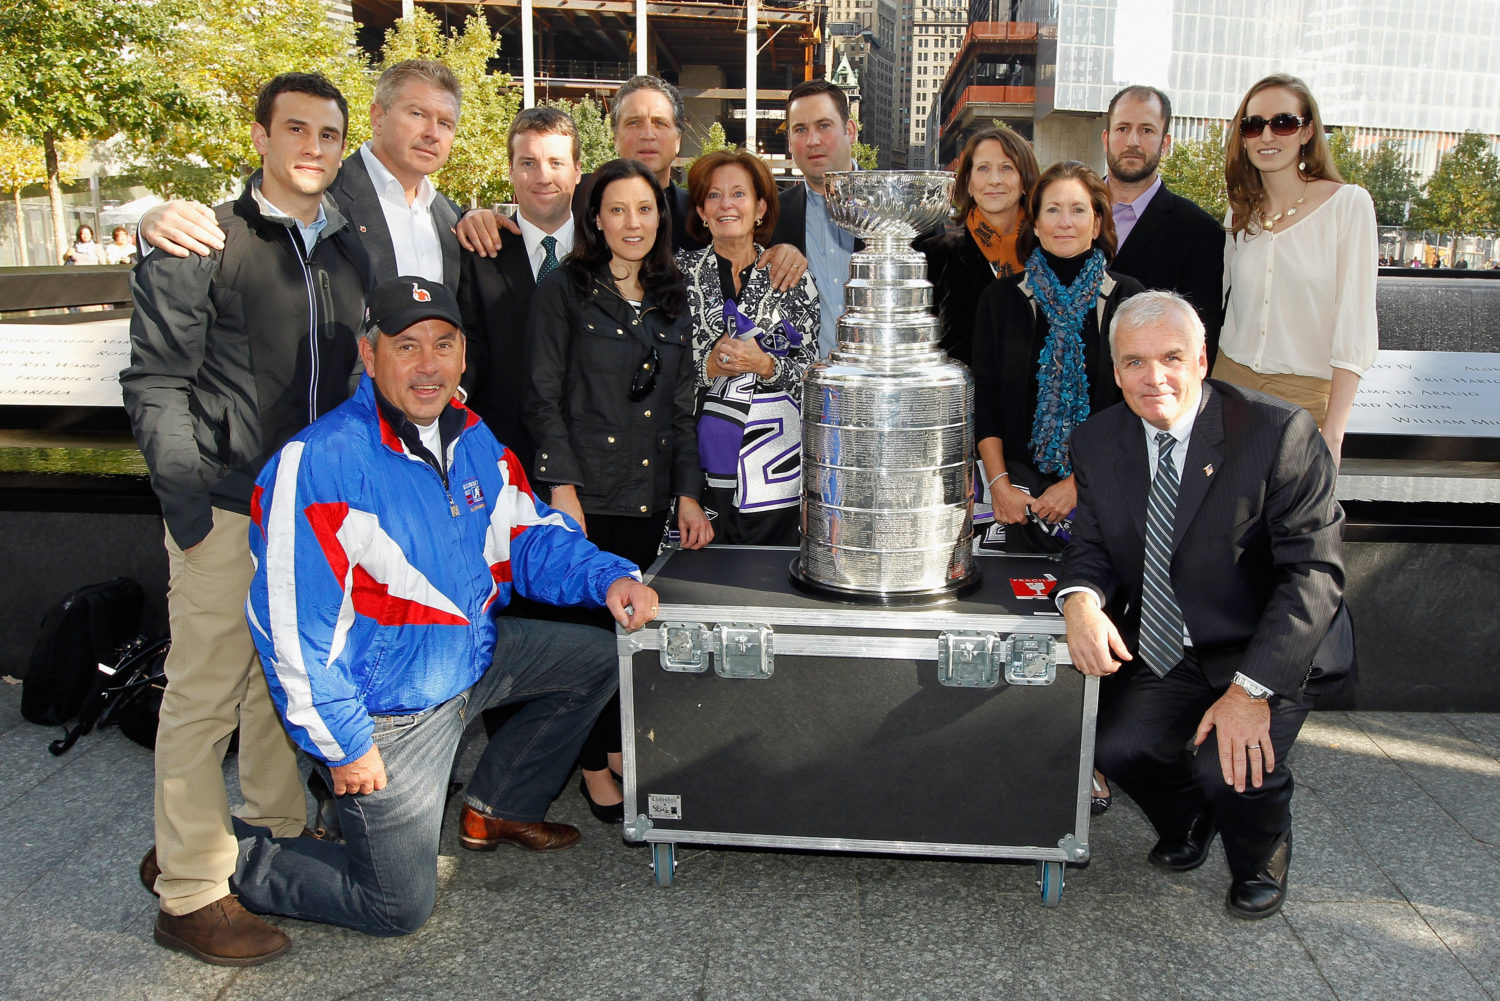 Fallen Kings scouts Ace Bailey, Mark Bavis, still get their day with the  Stanley Cup (PHOTO)